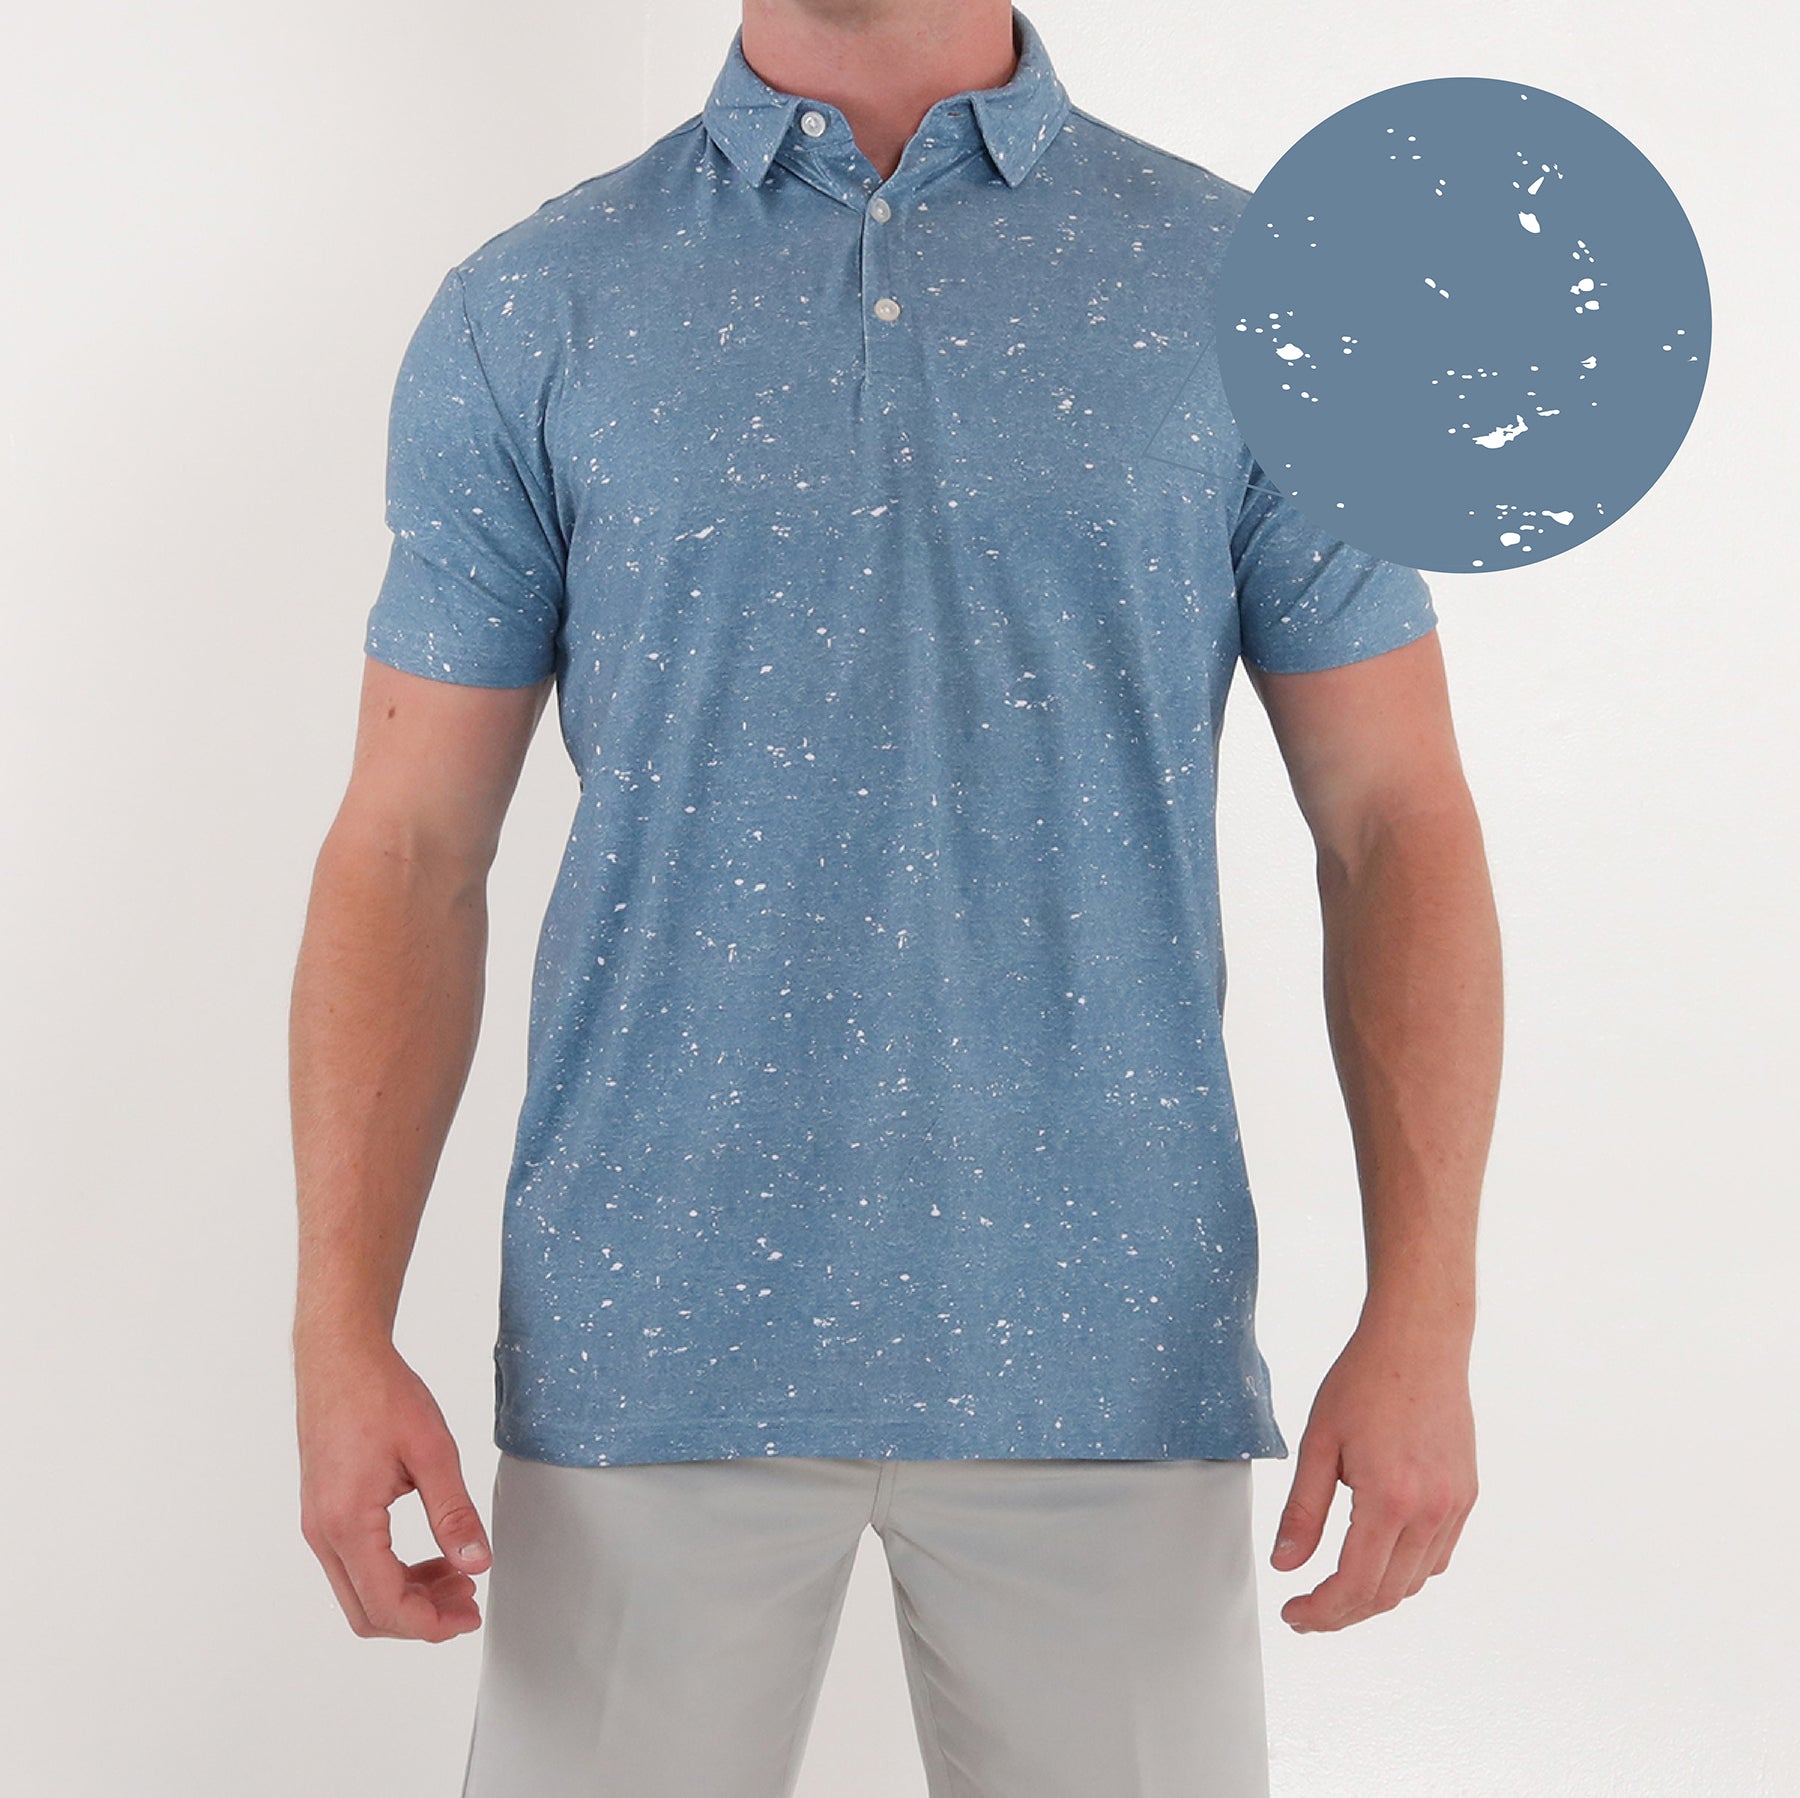 BOUNDS POLO - BLUE SHADOW